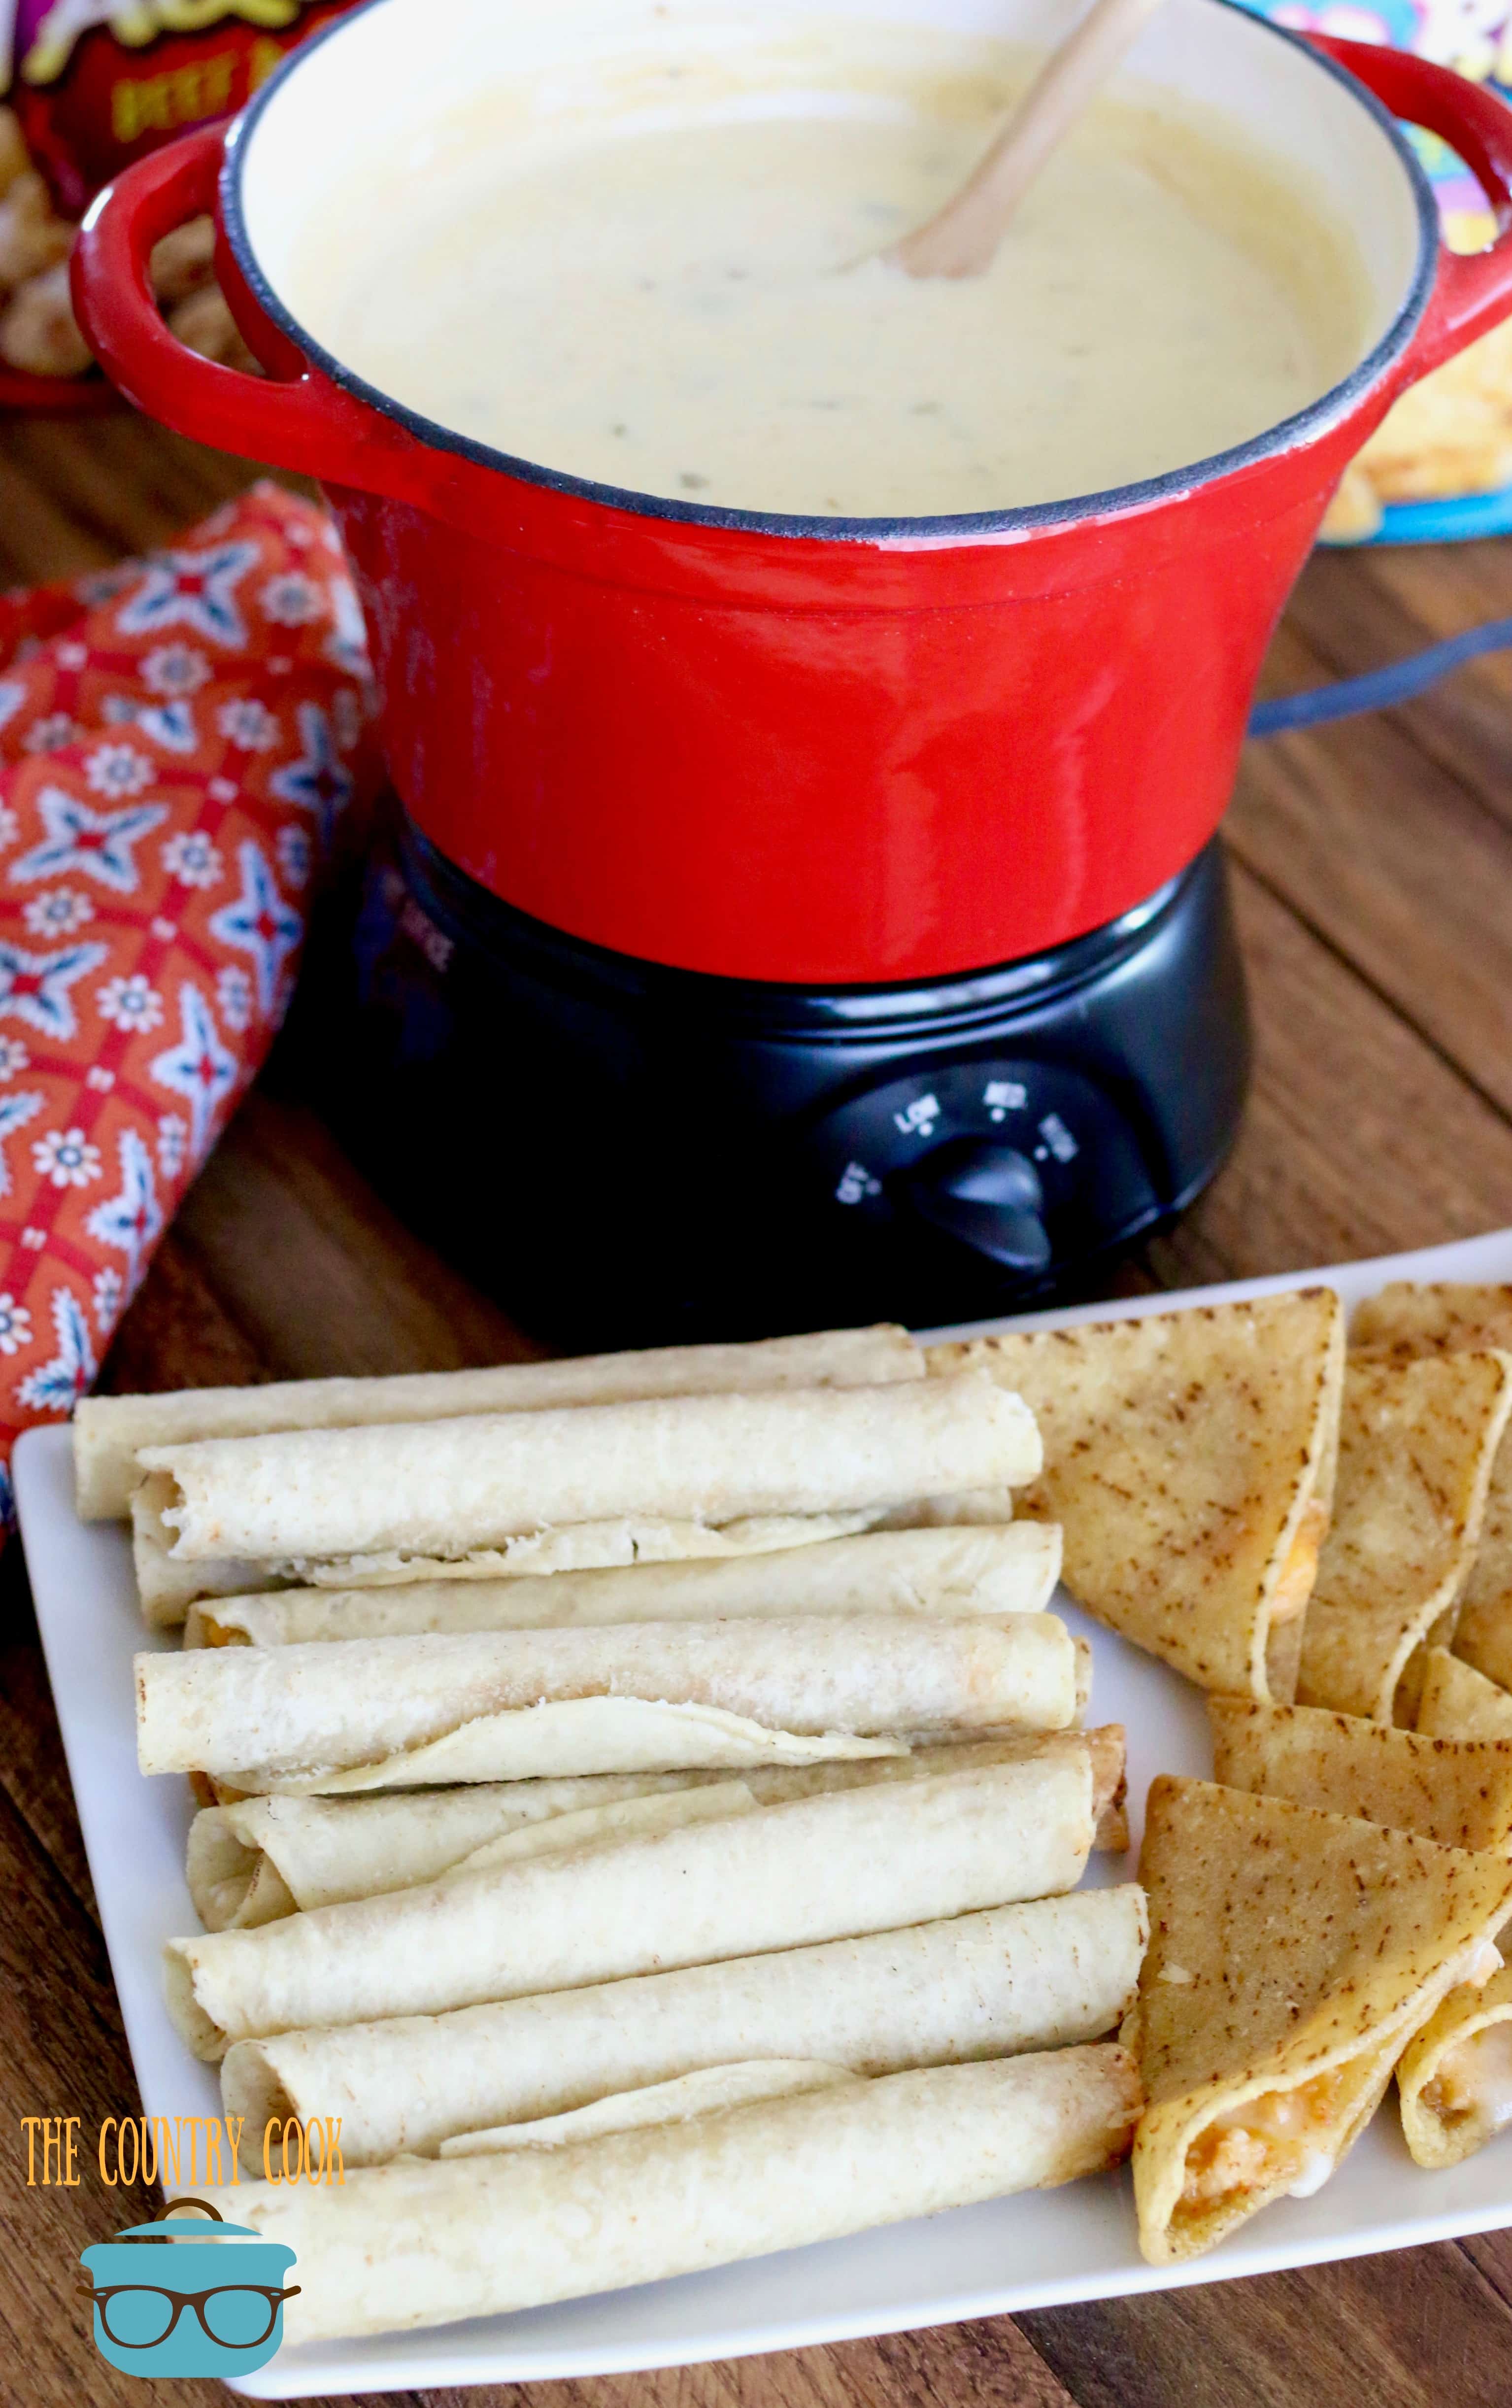 Crock Pot Queso Blanco Dip shown in the background with a tray of taquitos and mini tacos on a platter towards the front. 